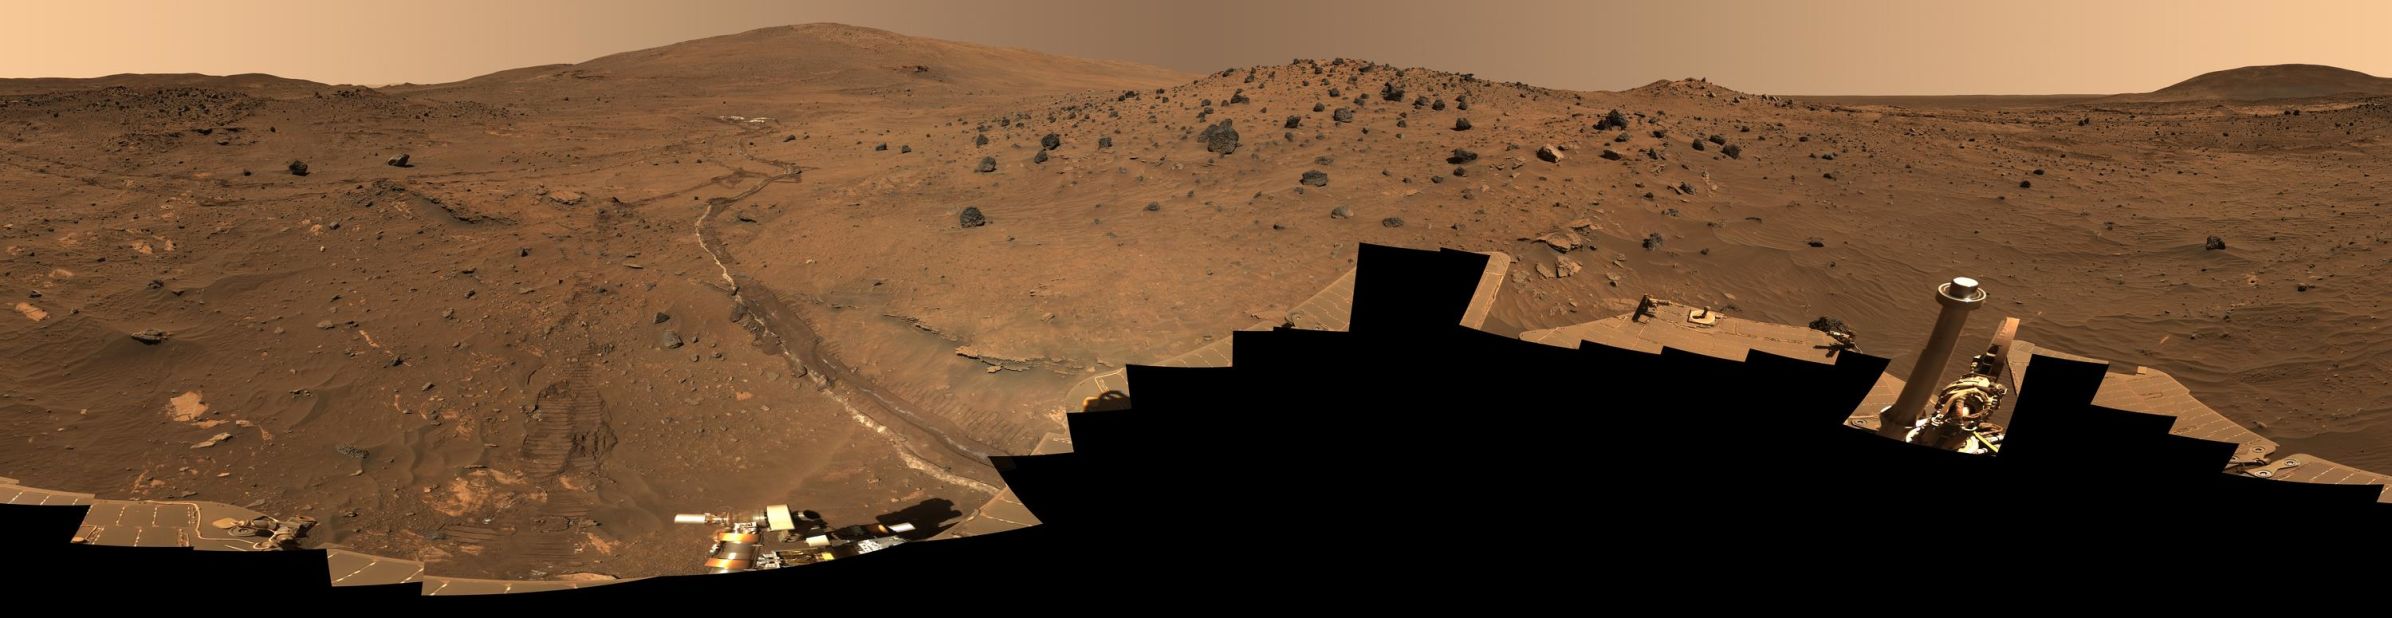 In 2006, NASA's Mars Exploration Rover Spirit captured a 360-degree view known as the McMurdo panorama. The images were taken at the time of year when Mars is farthest from the sun and dust storms are less frequent.